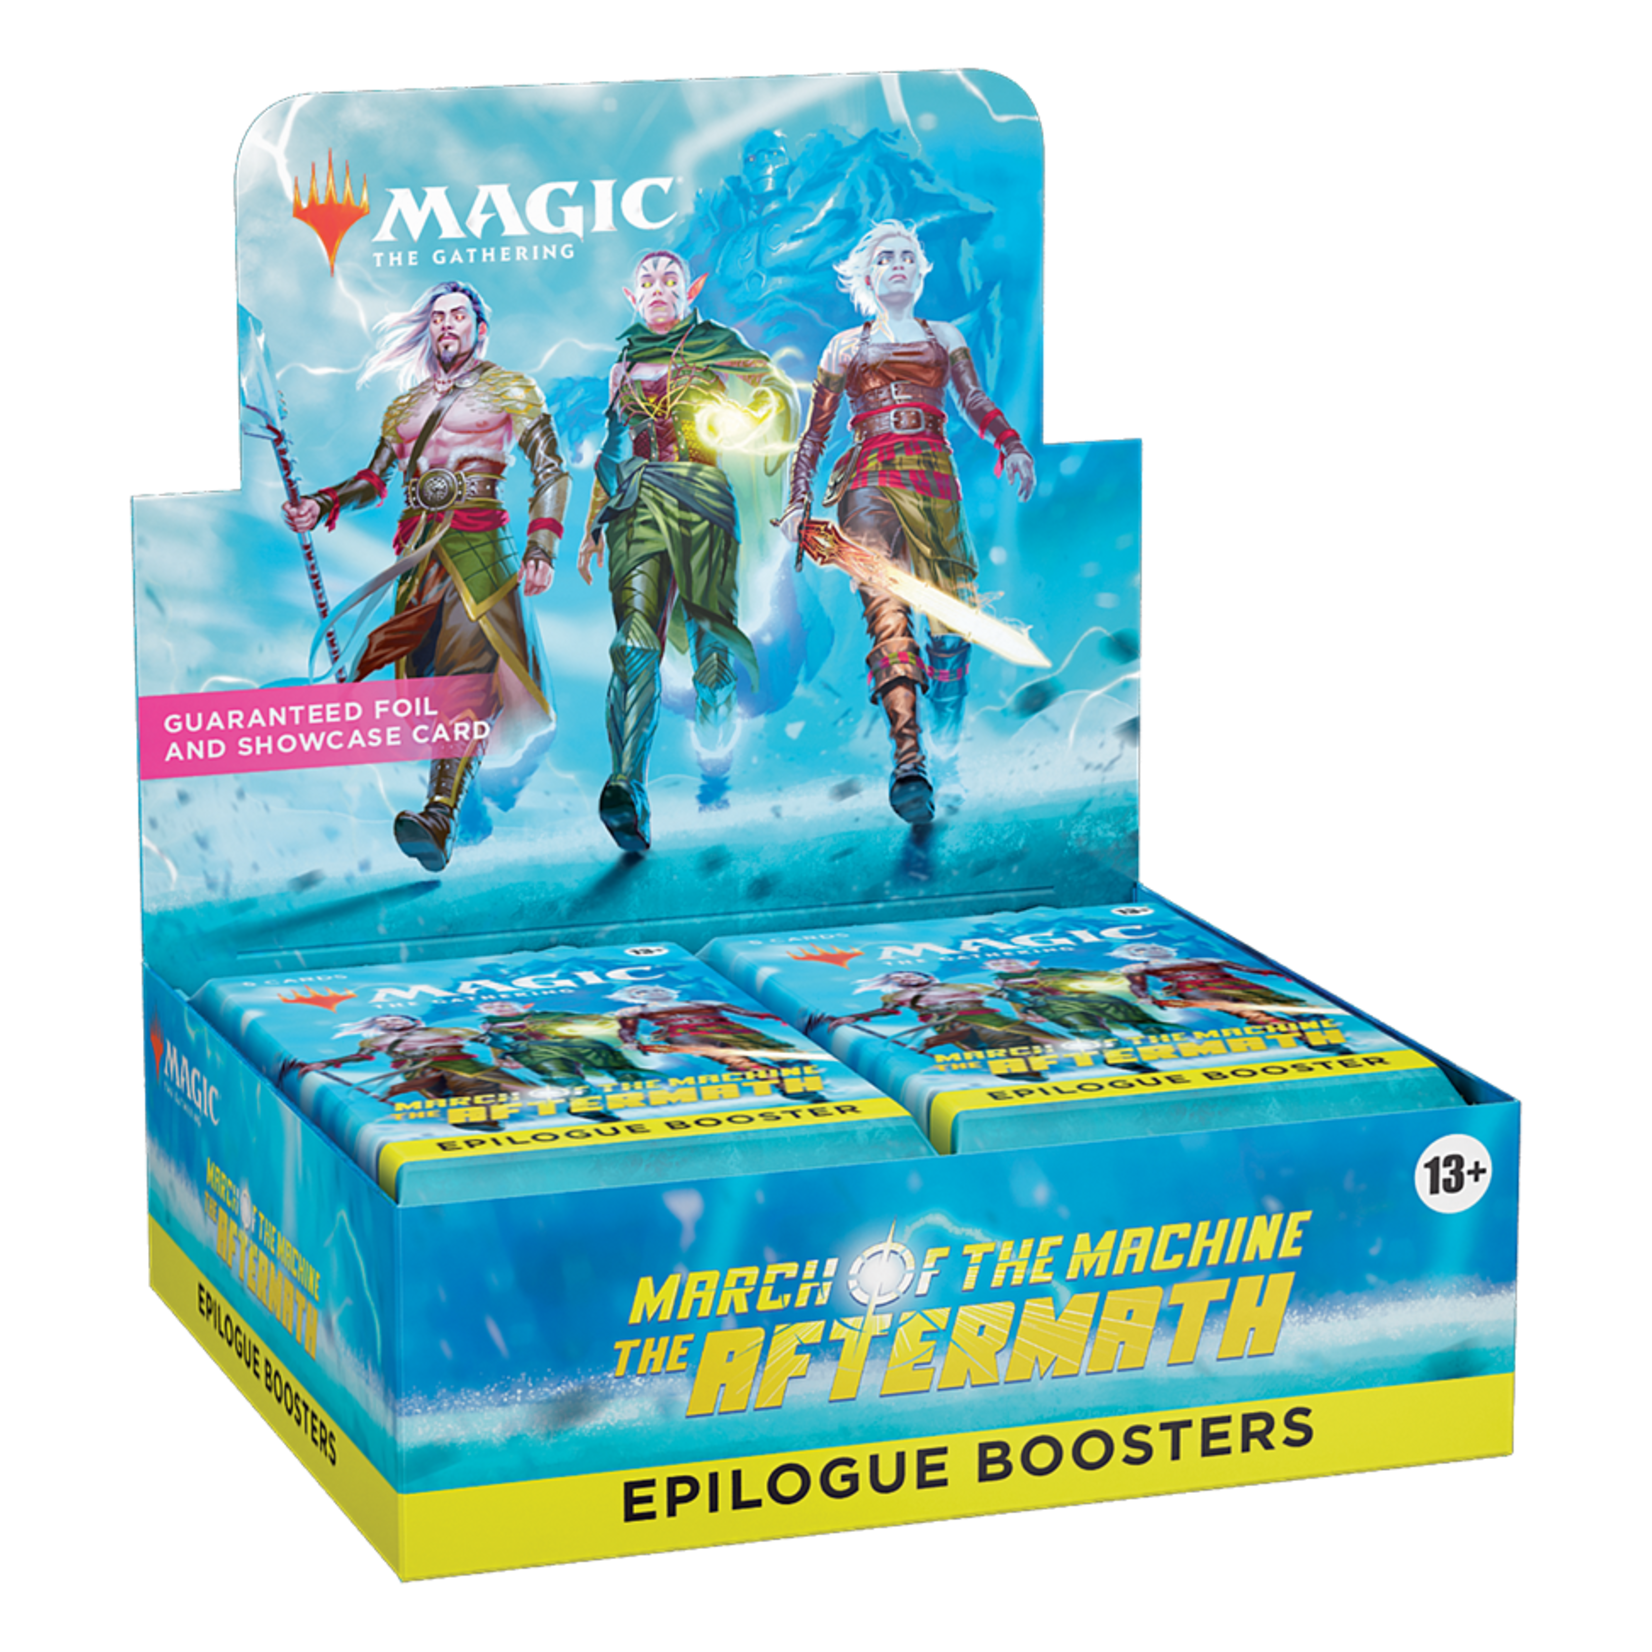 Wizards of the Coast Magic - March of the Machine: The Aftermath Epilogue Booster Box